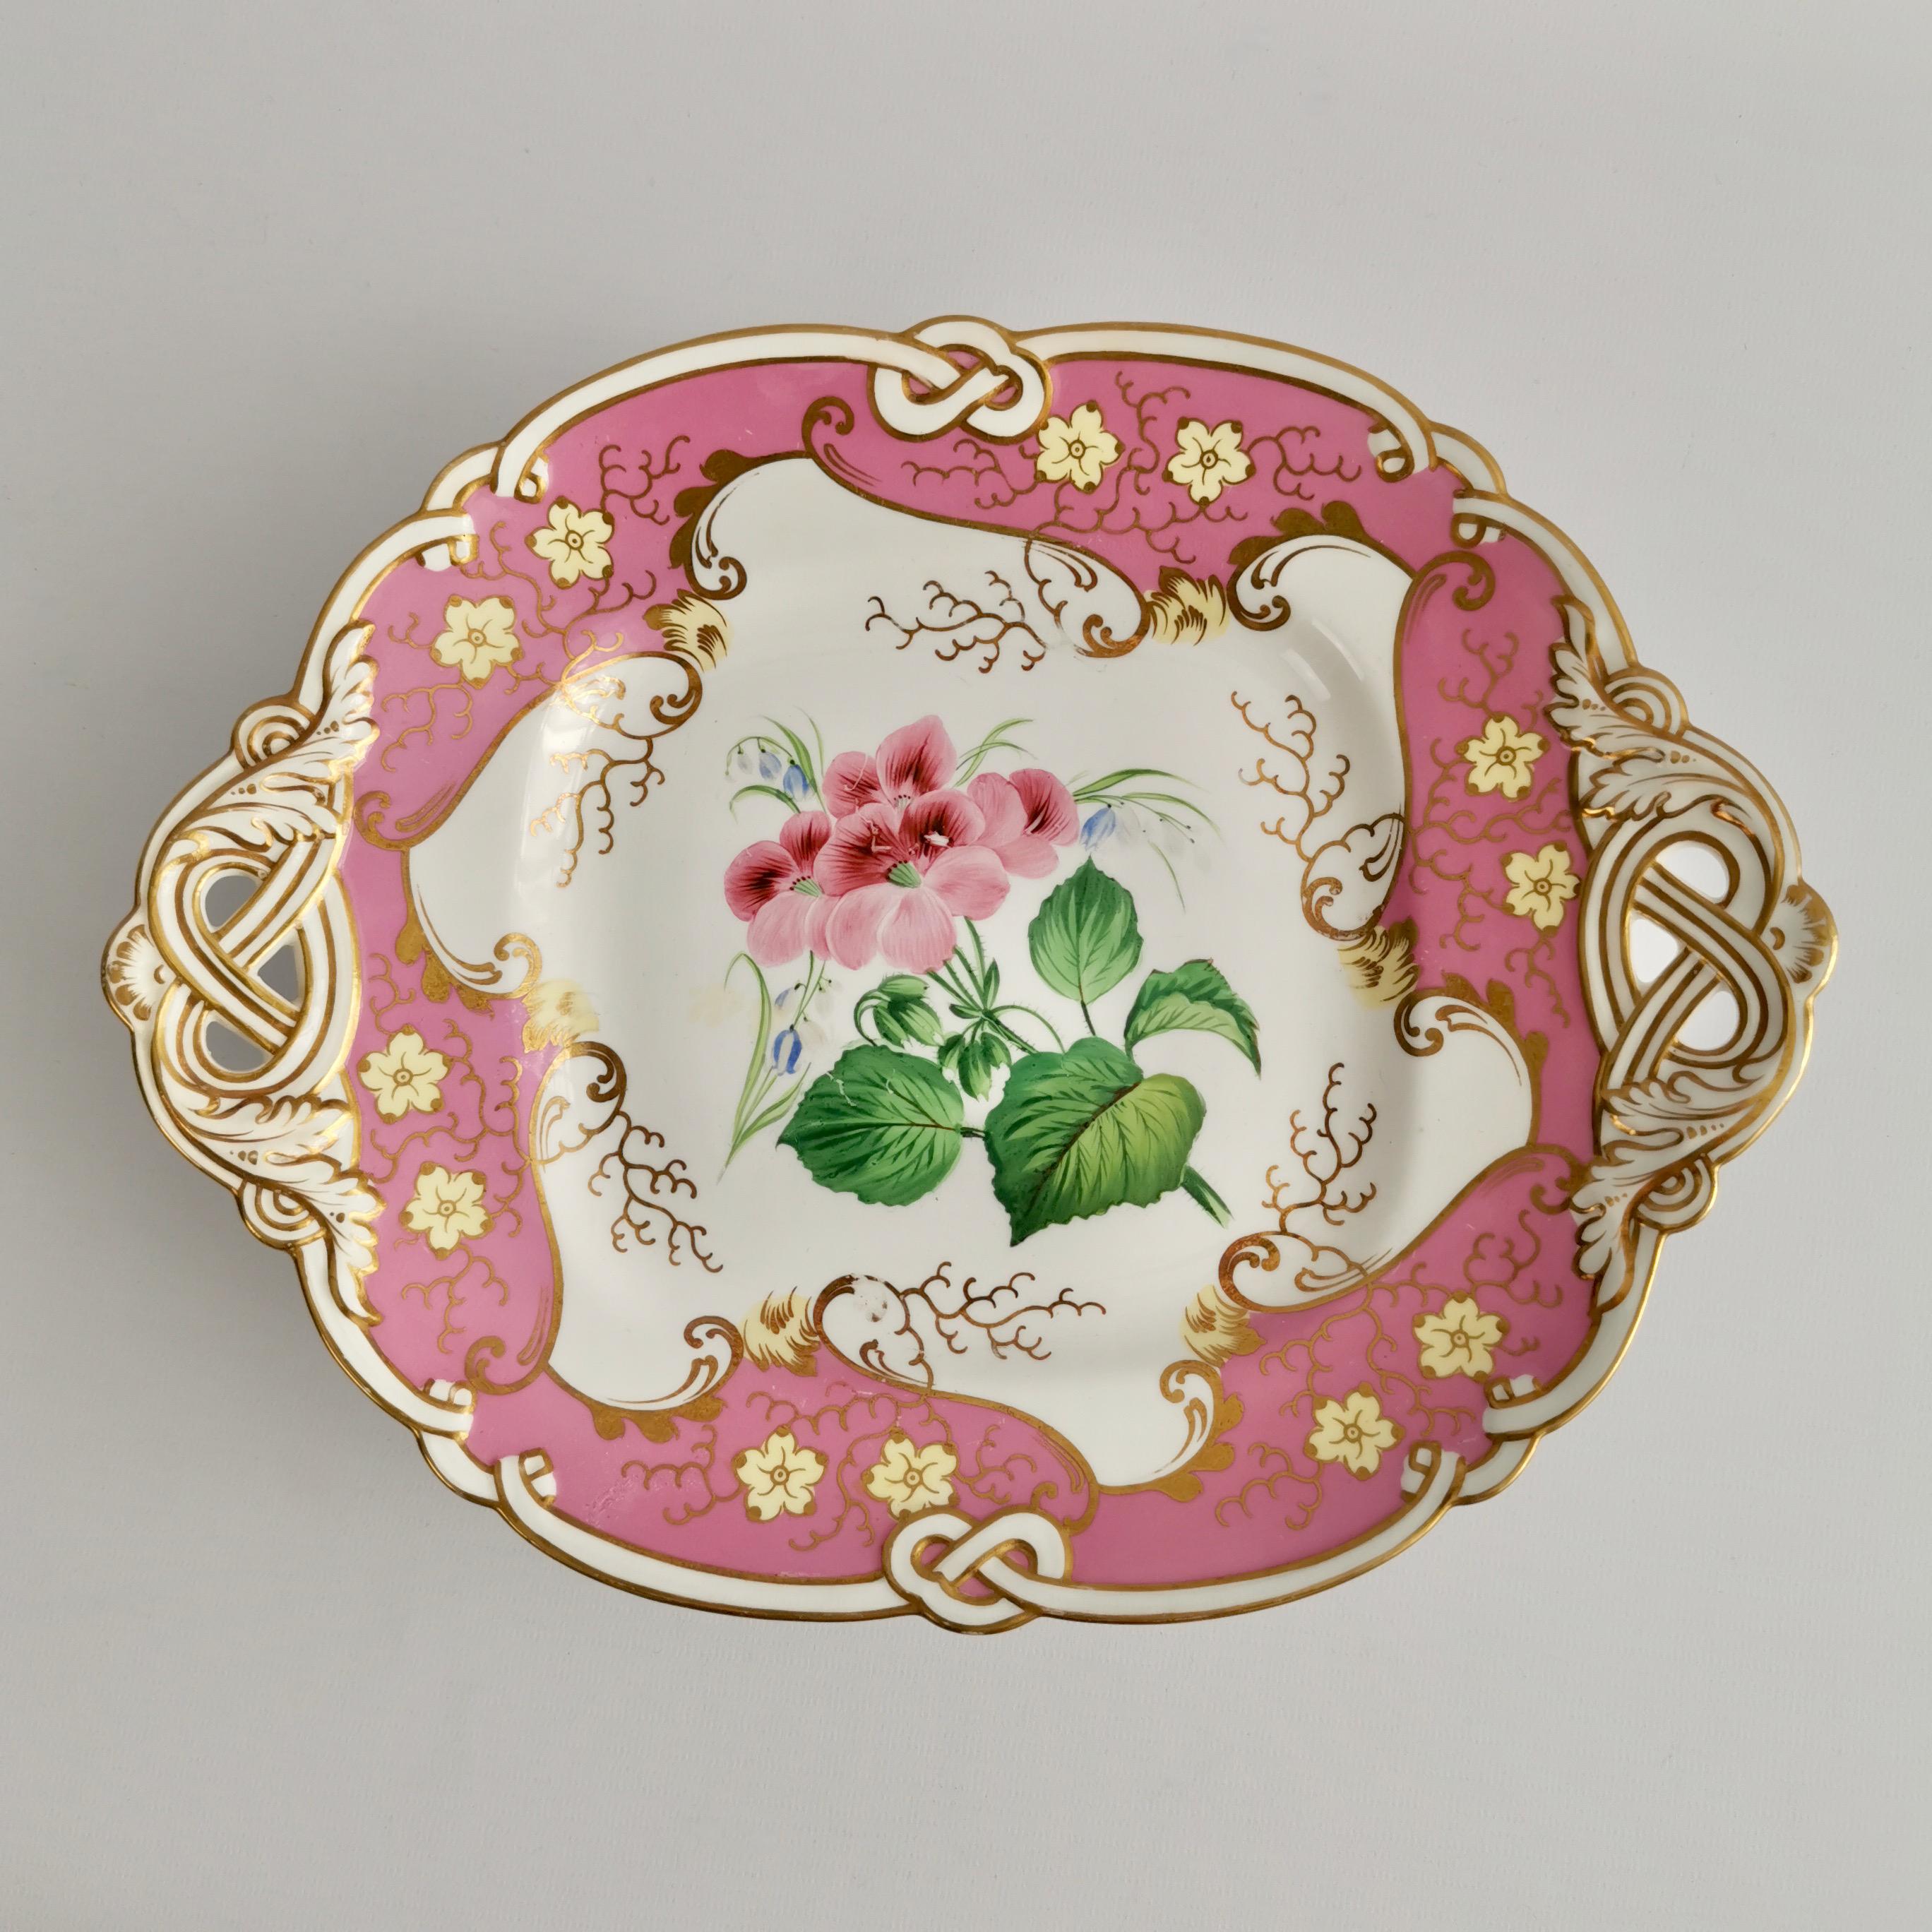 English Samuel Alcock Small Porcelain Dessert Set, Pink with Flowers, Victorian 1854